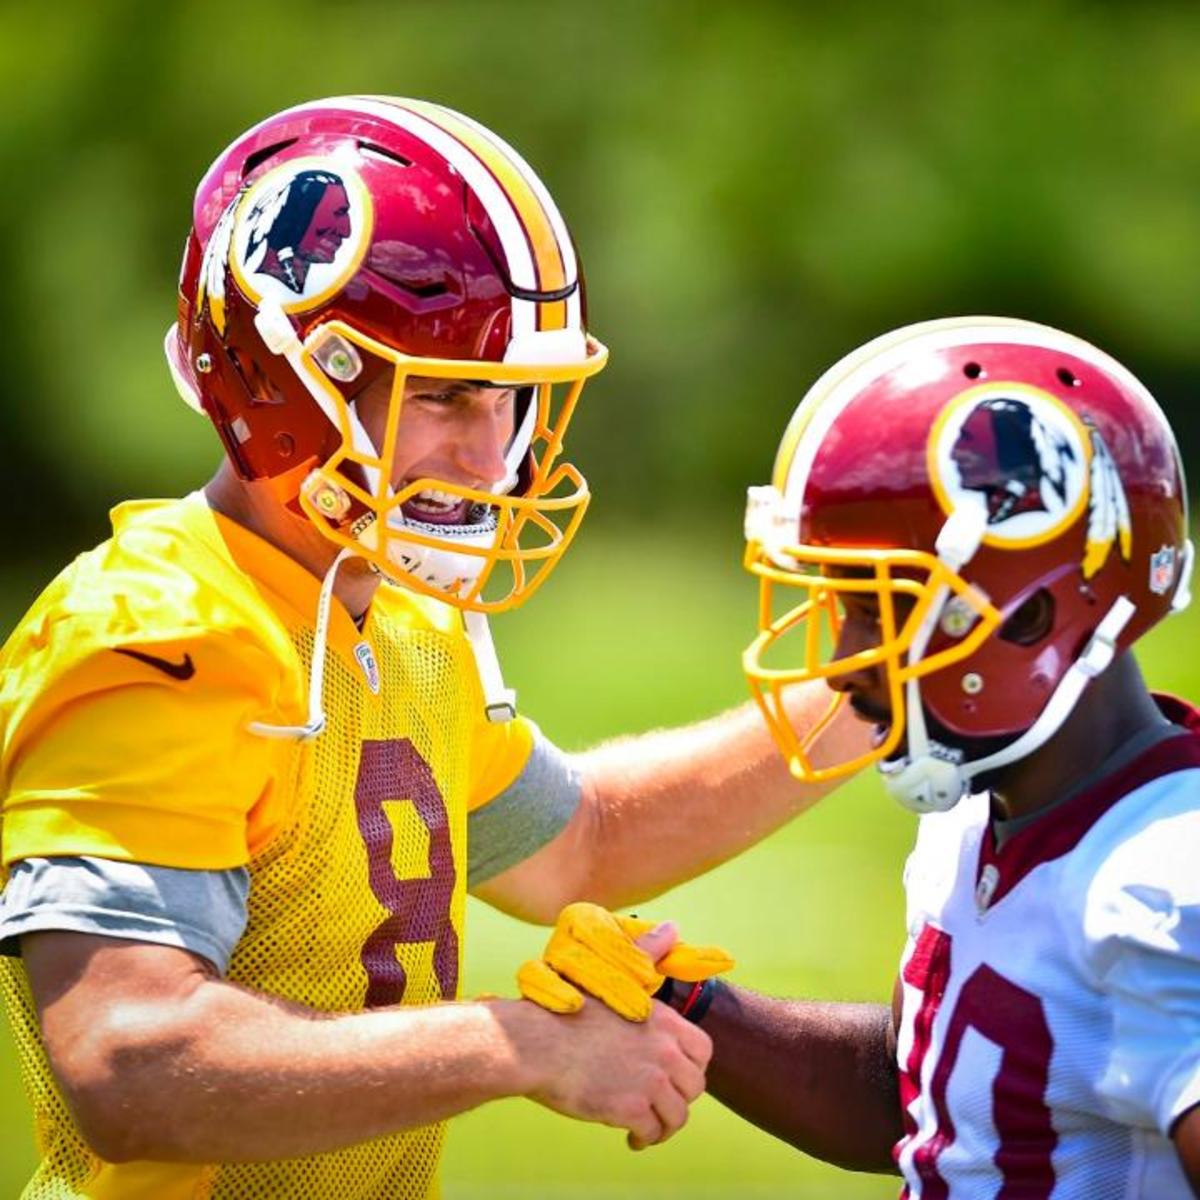 Kirk Cousins working hard during the 2016 Redskins offseason OTA's.  Photo courtesy of the Redskins.